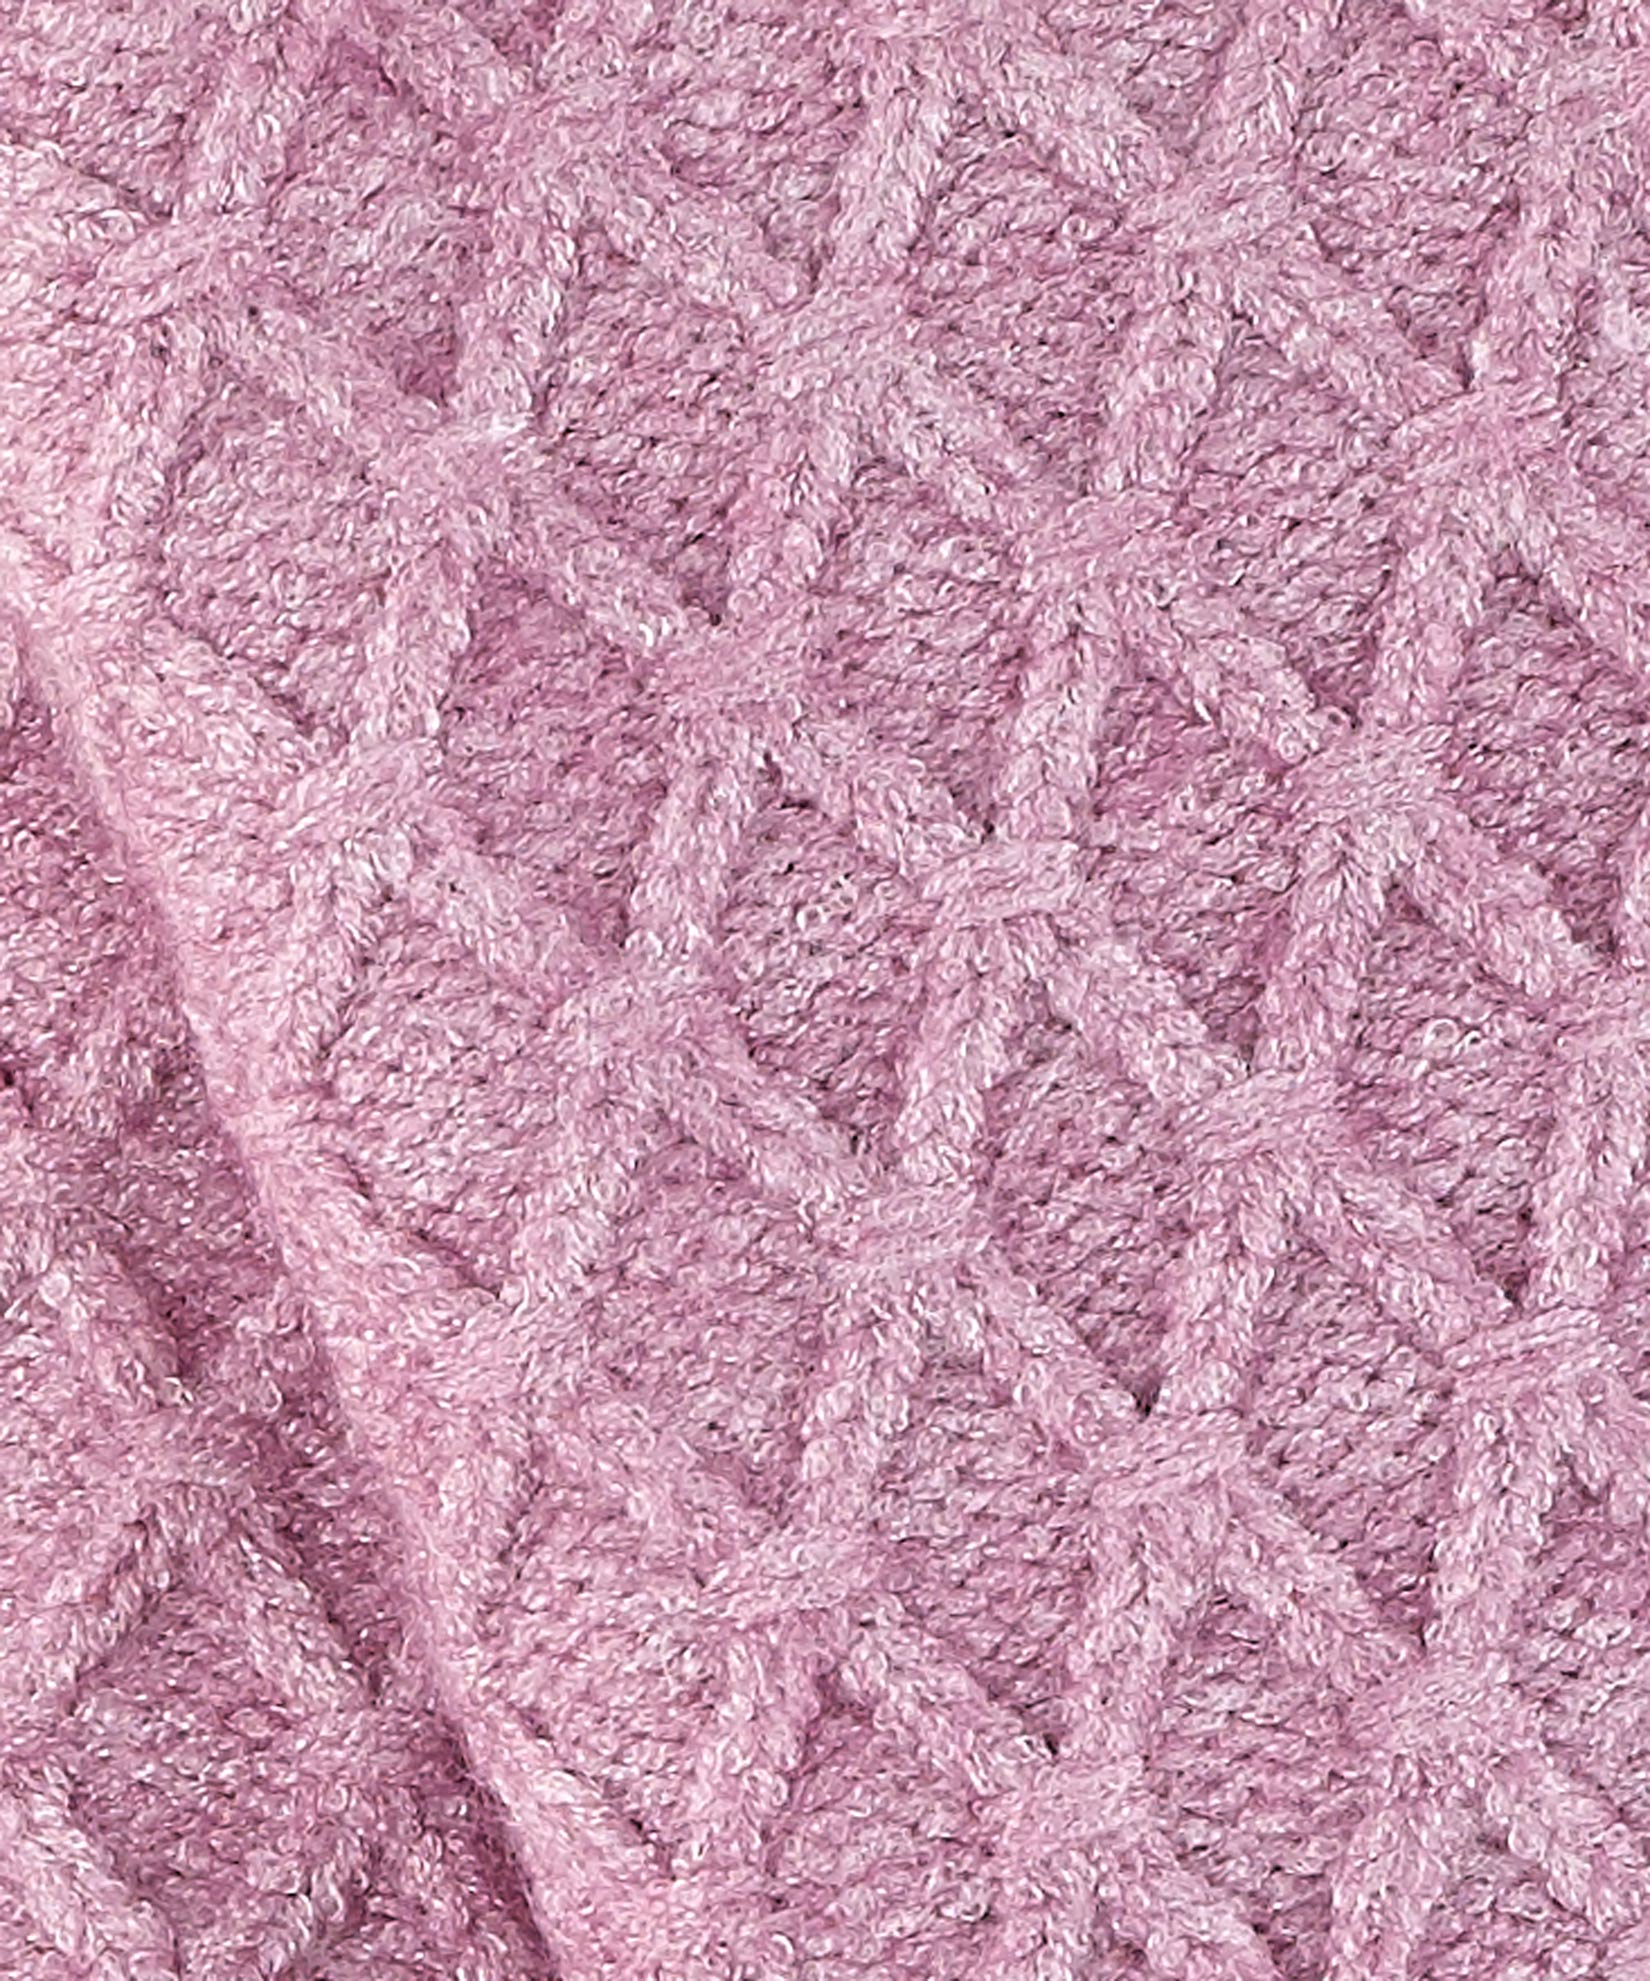 Diamond Fingerless Glove in color Orchid